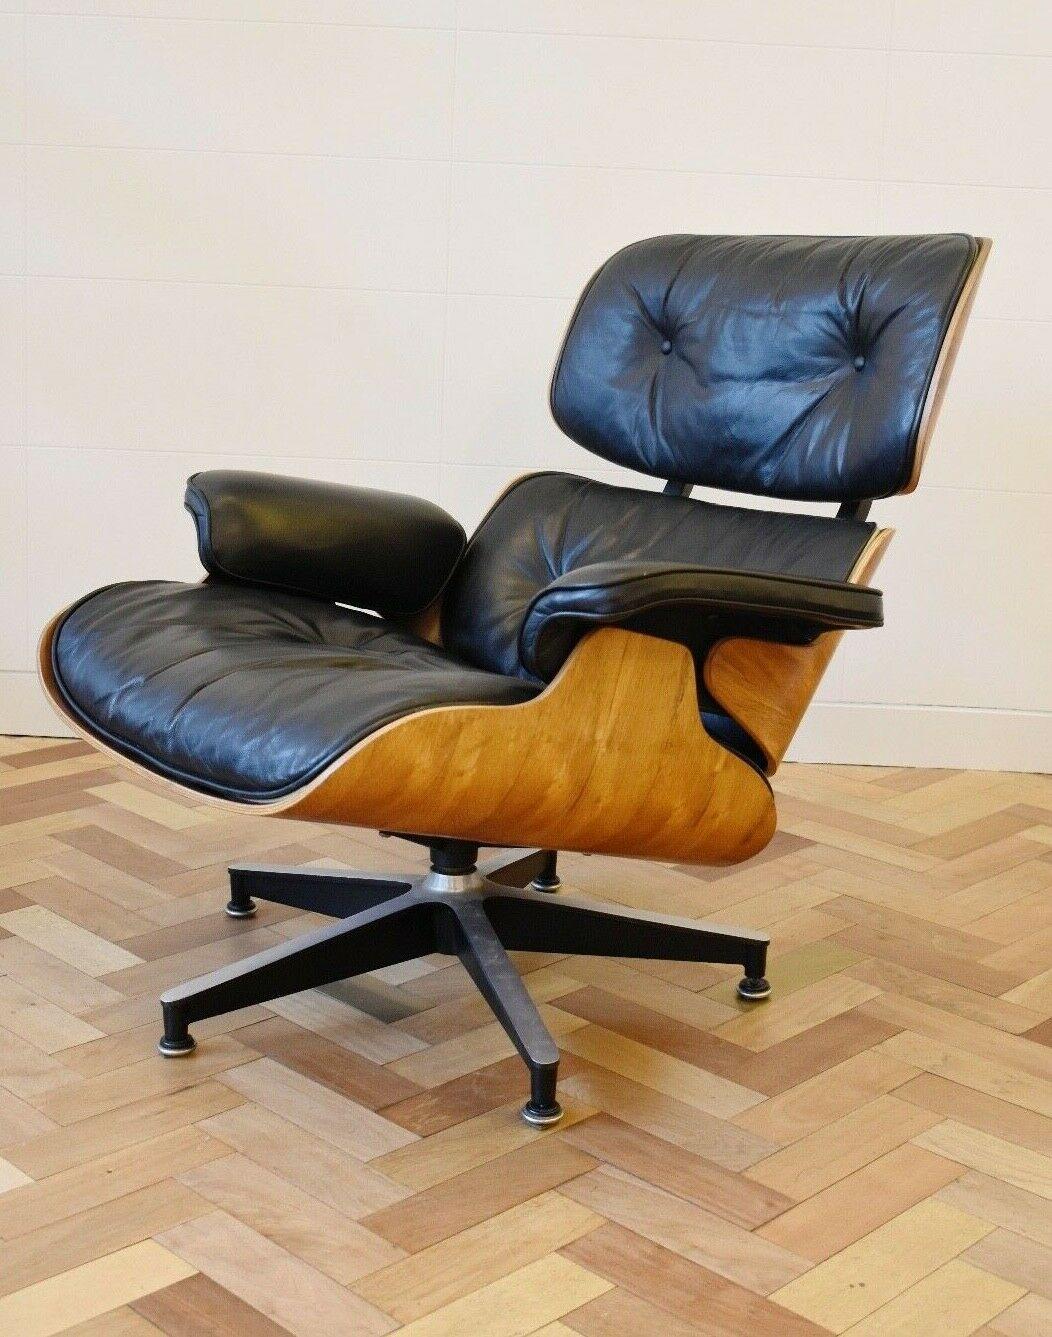 European Charles and Ray Eames Lounge Chair Herman Miller Rosewood, 1970s